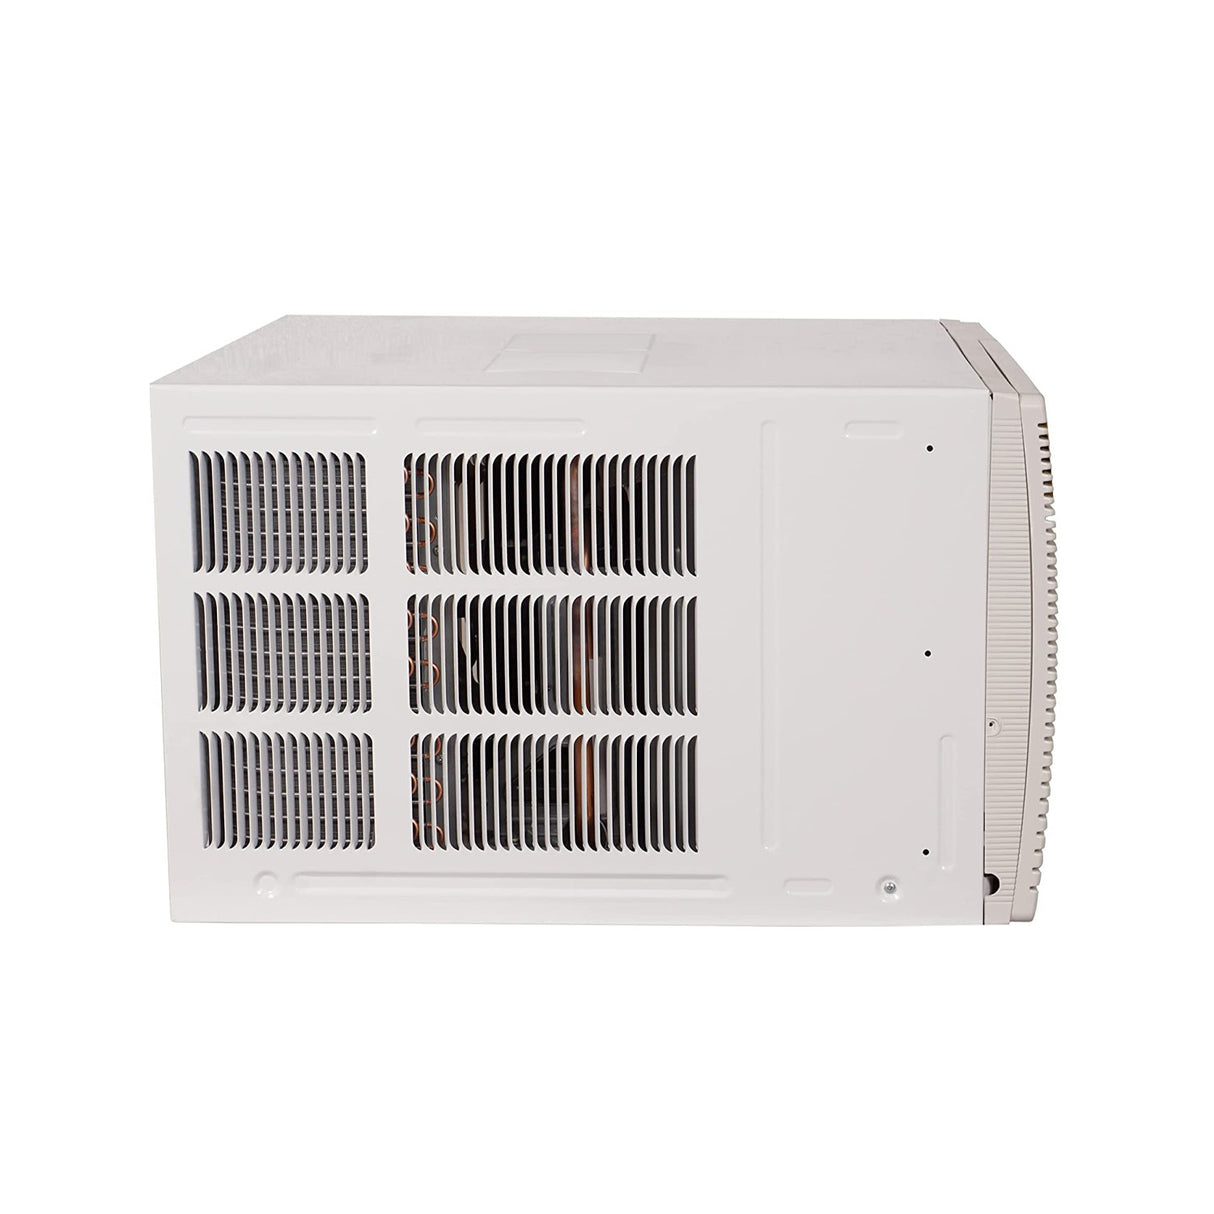 Carrier 1.0 Ton Window AC: Optimal cooling, copper durability - the best HVAC choice.